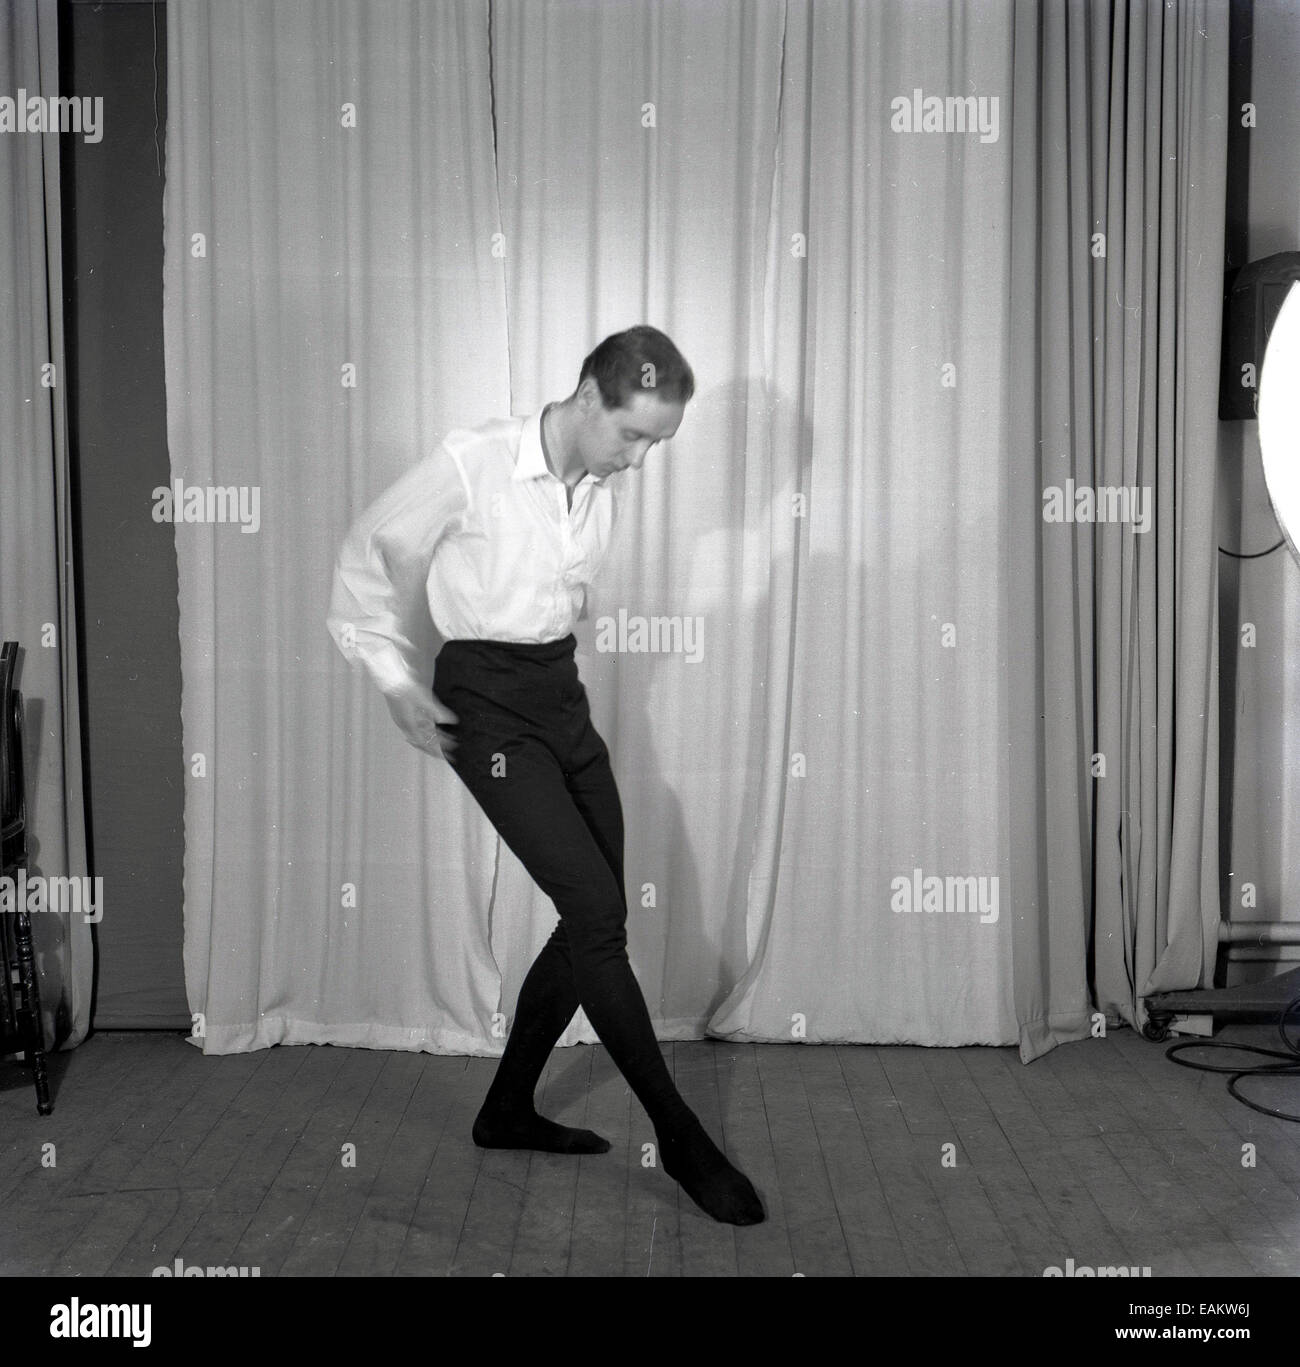 1950s, historical picture of a male ballet dancer practicing or rehearsing his moves on a wooden stage floor in front of  a curtain Stock Photo